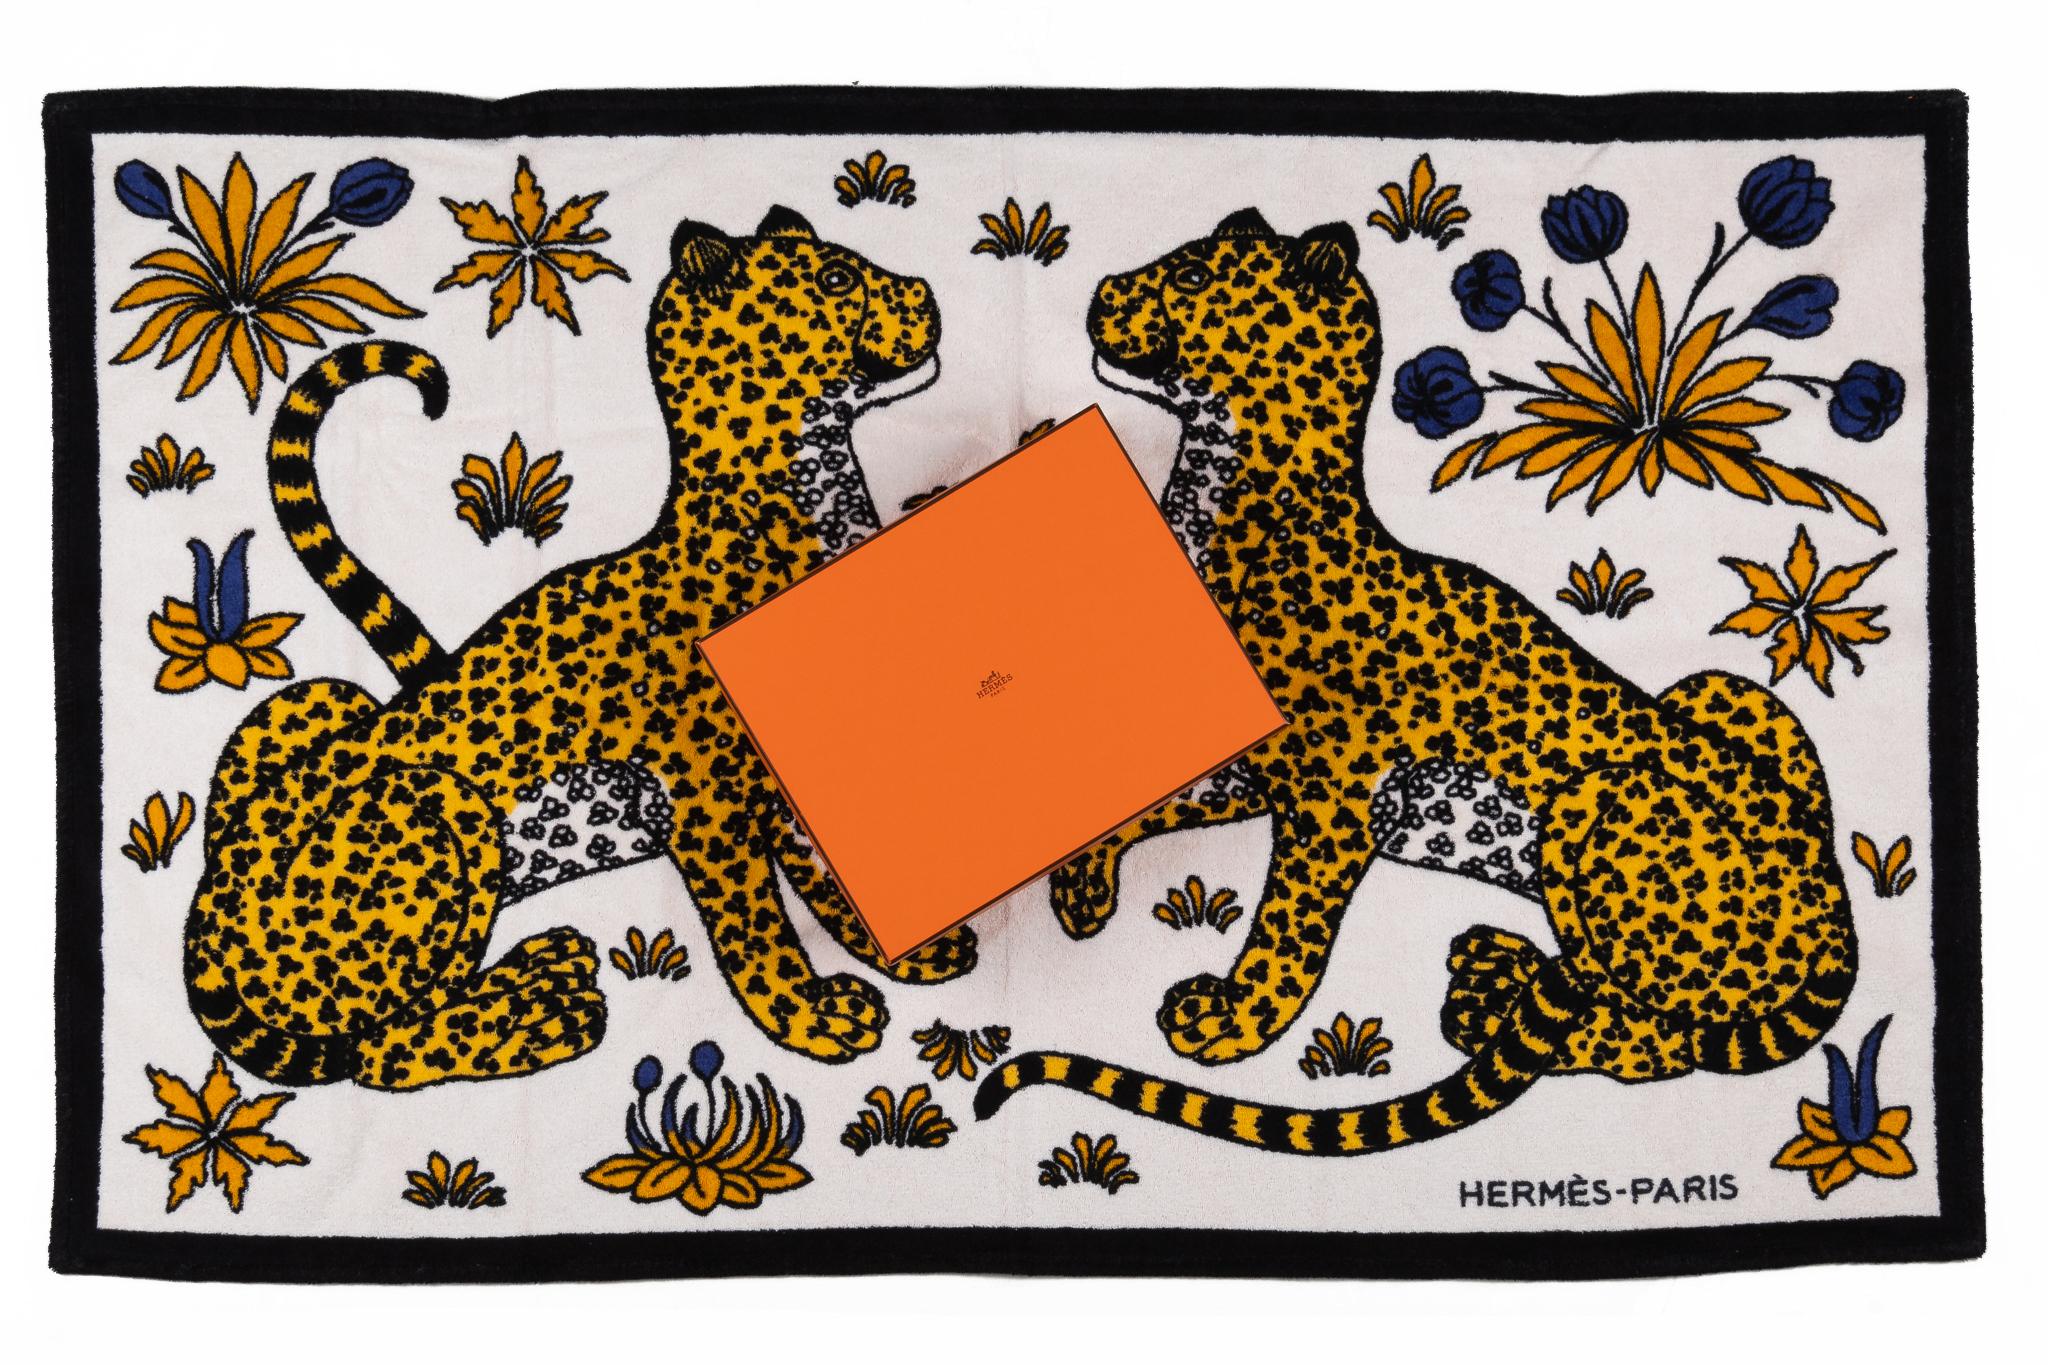 Hermès guepards Beach Towel in white and black. The pattern shows two yellow leopards facing each other. The item is in new and comes with the box.